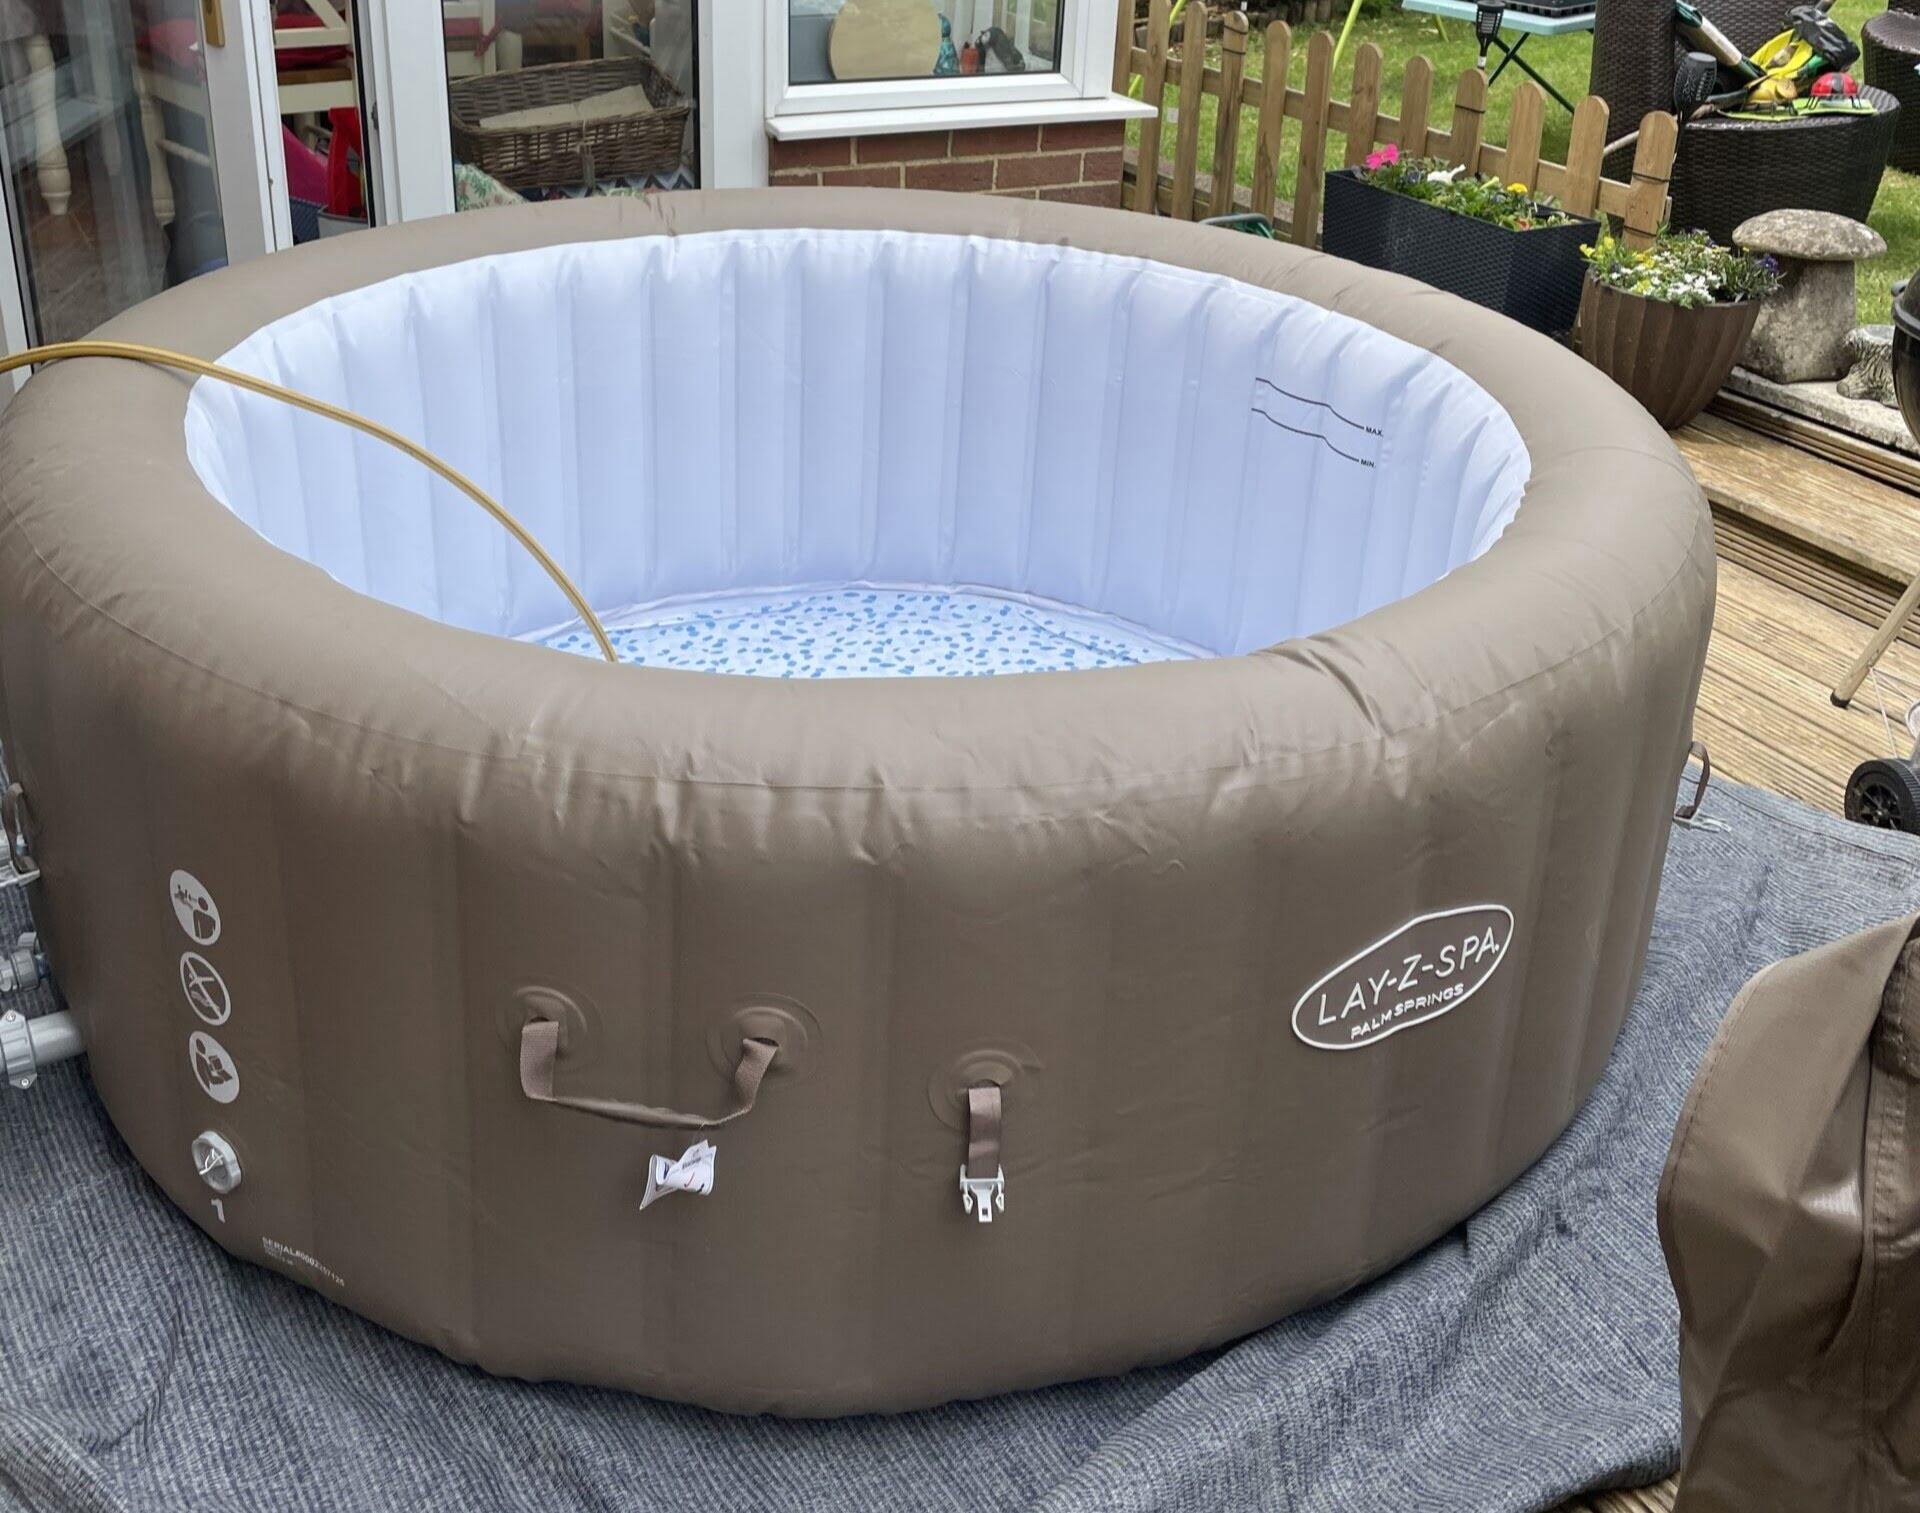 How To Find Leak In Inflatable Hot Tub